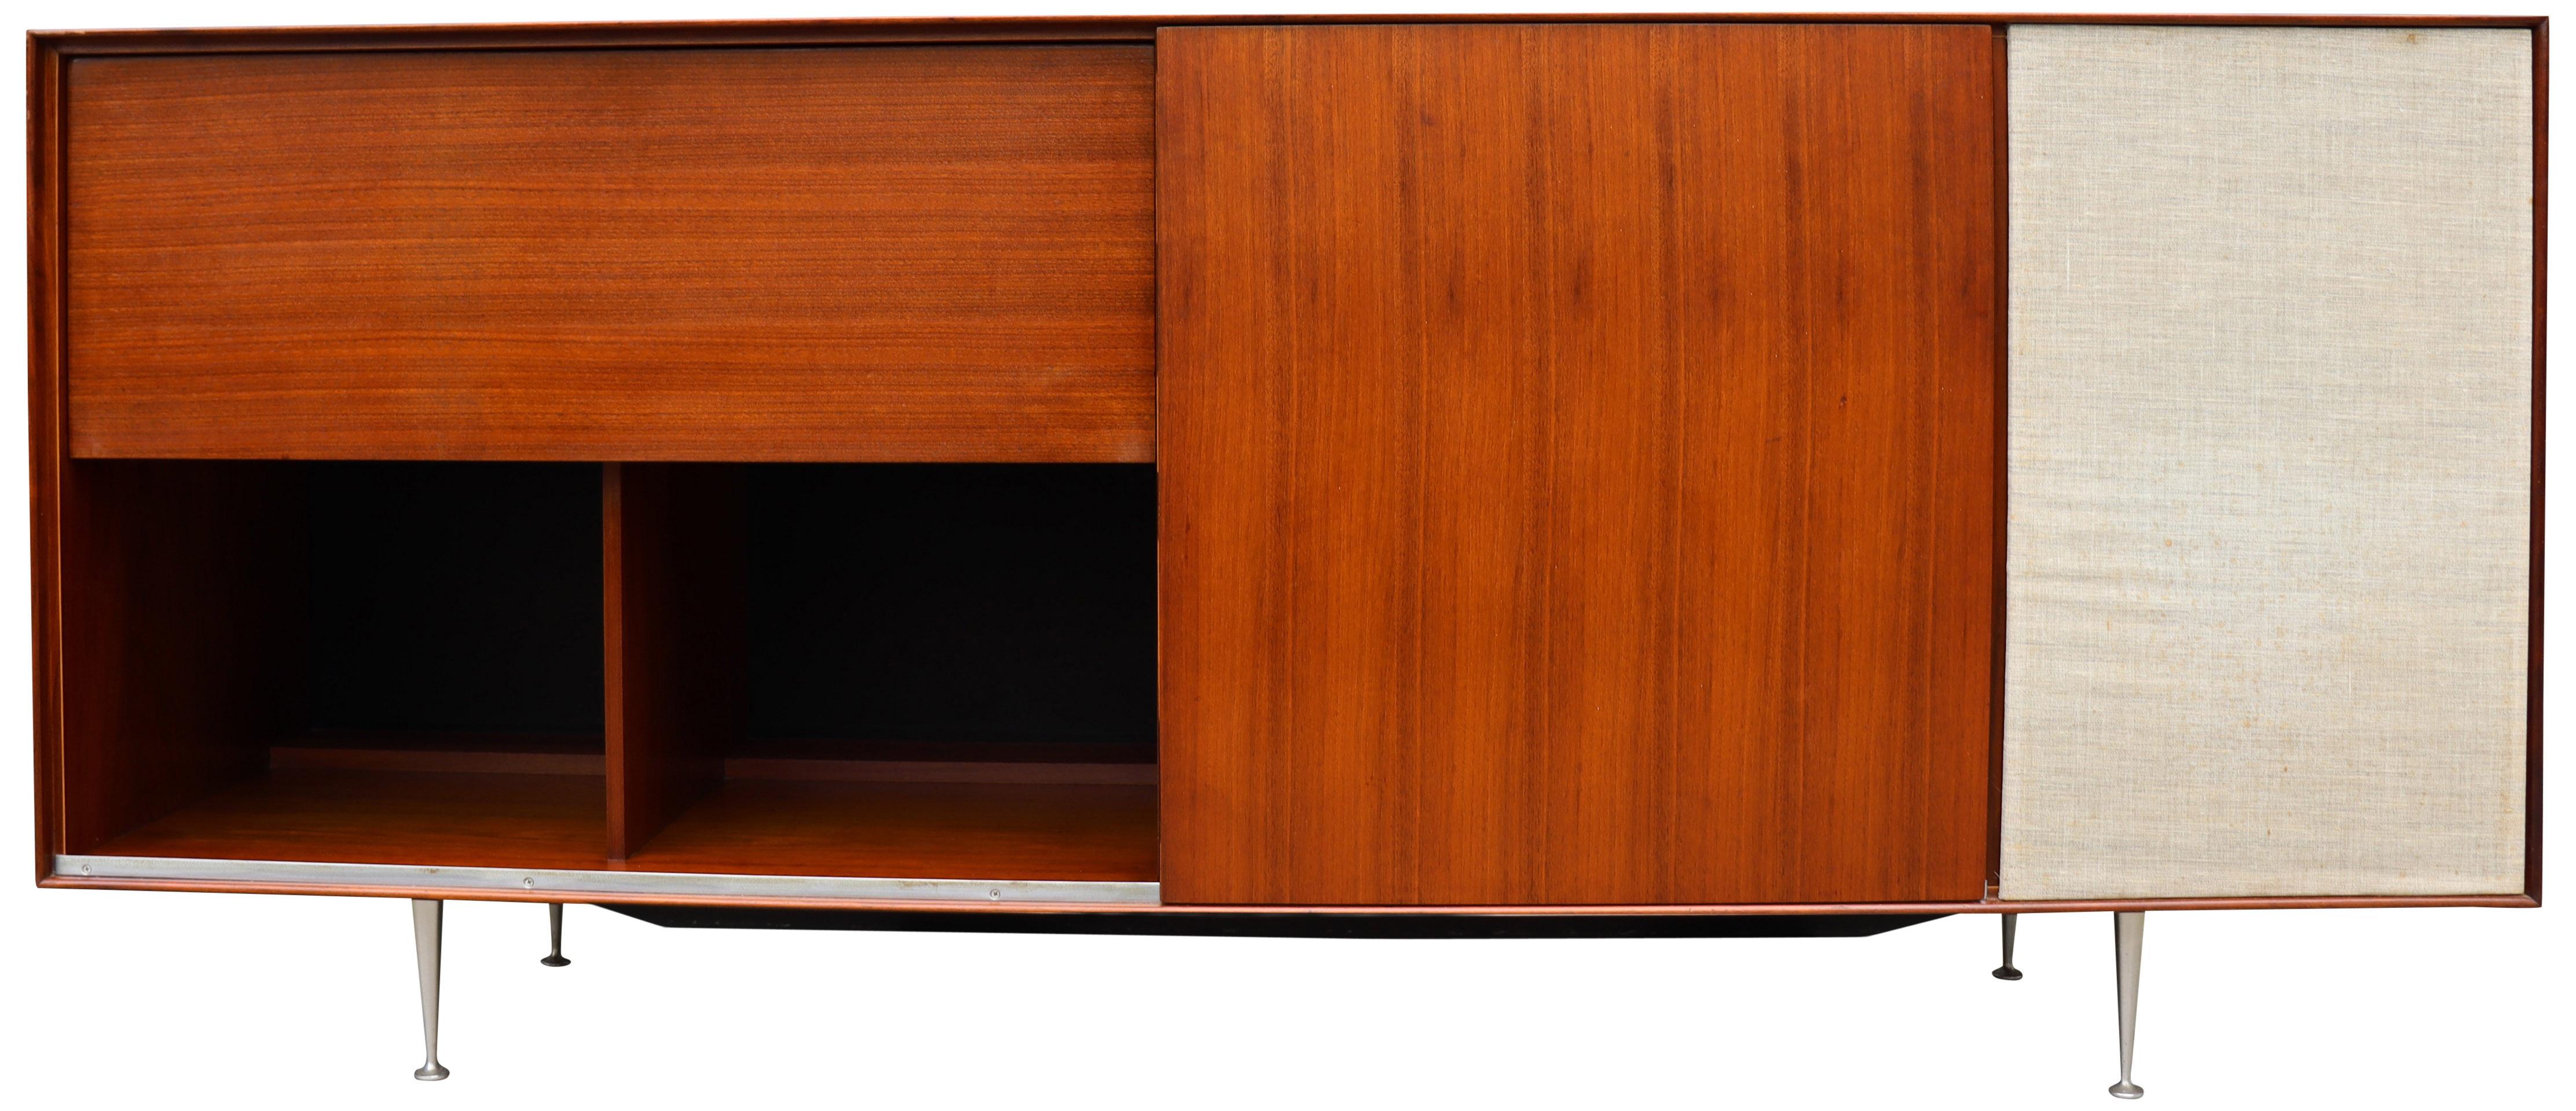 For your consideration is this amazing Hifi cabinet designed by George Nelson for Herman Miller. Featuring walnut on the signature cast aluminum legs. Having one adjustable shelf on the right sliding door, one adjustable shelf and one pull-out shelf